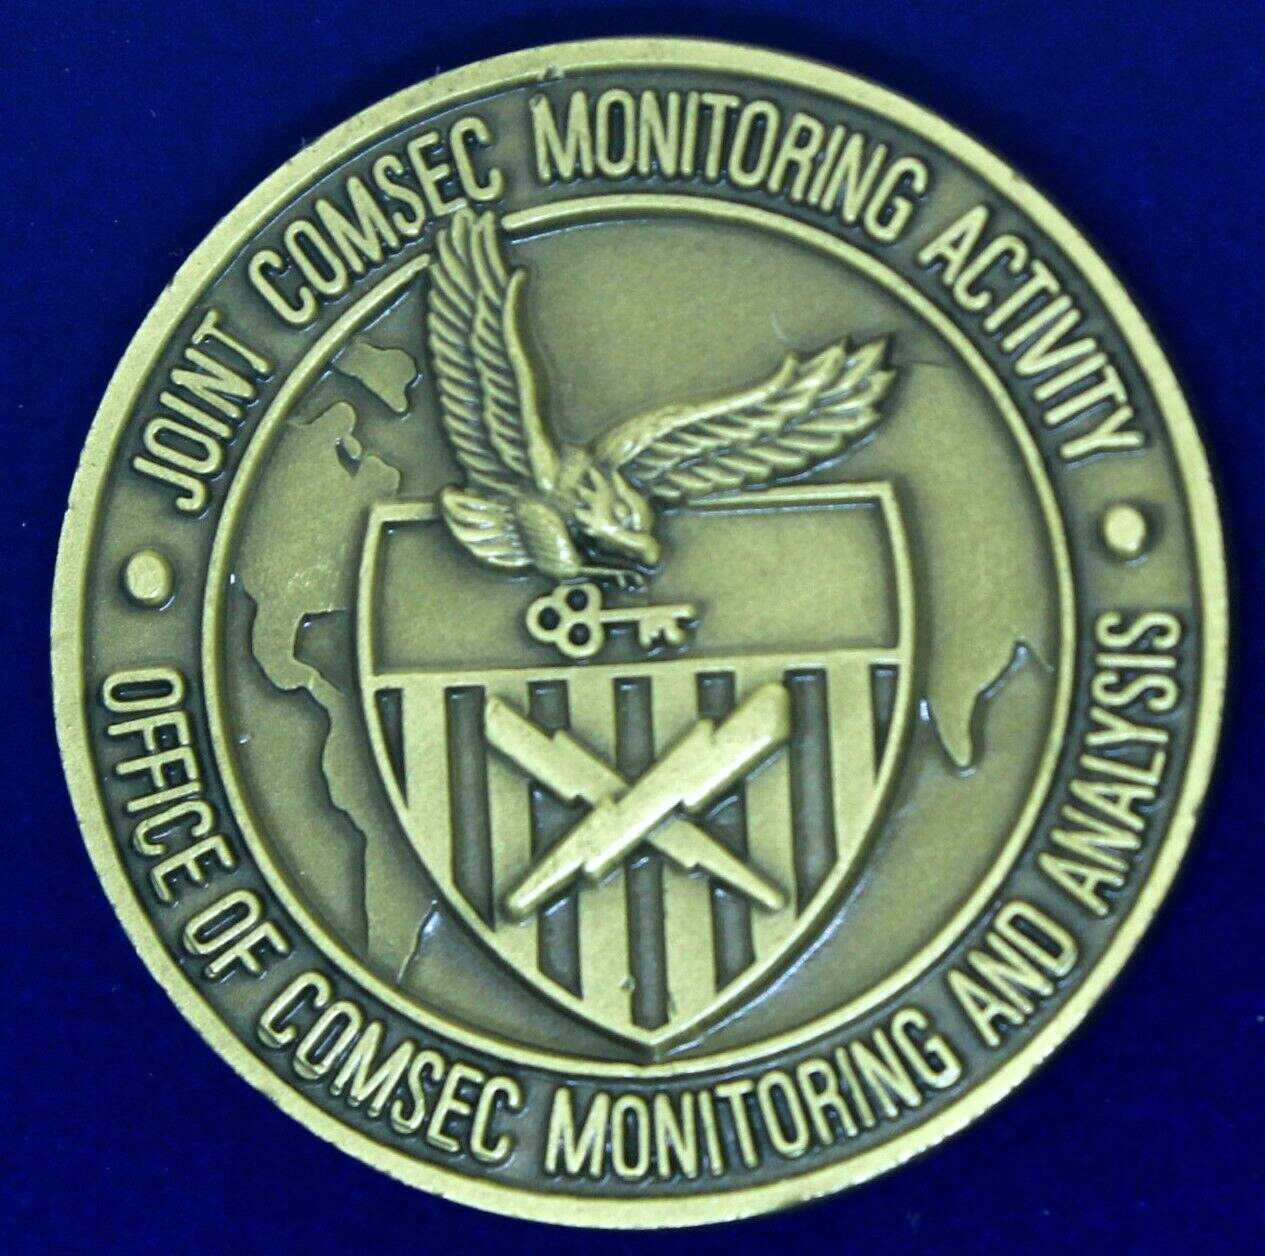 DOD Joint COMSEC Monitoring Activity & Analysis Challenge Coin X-8